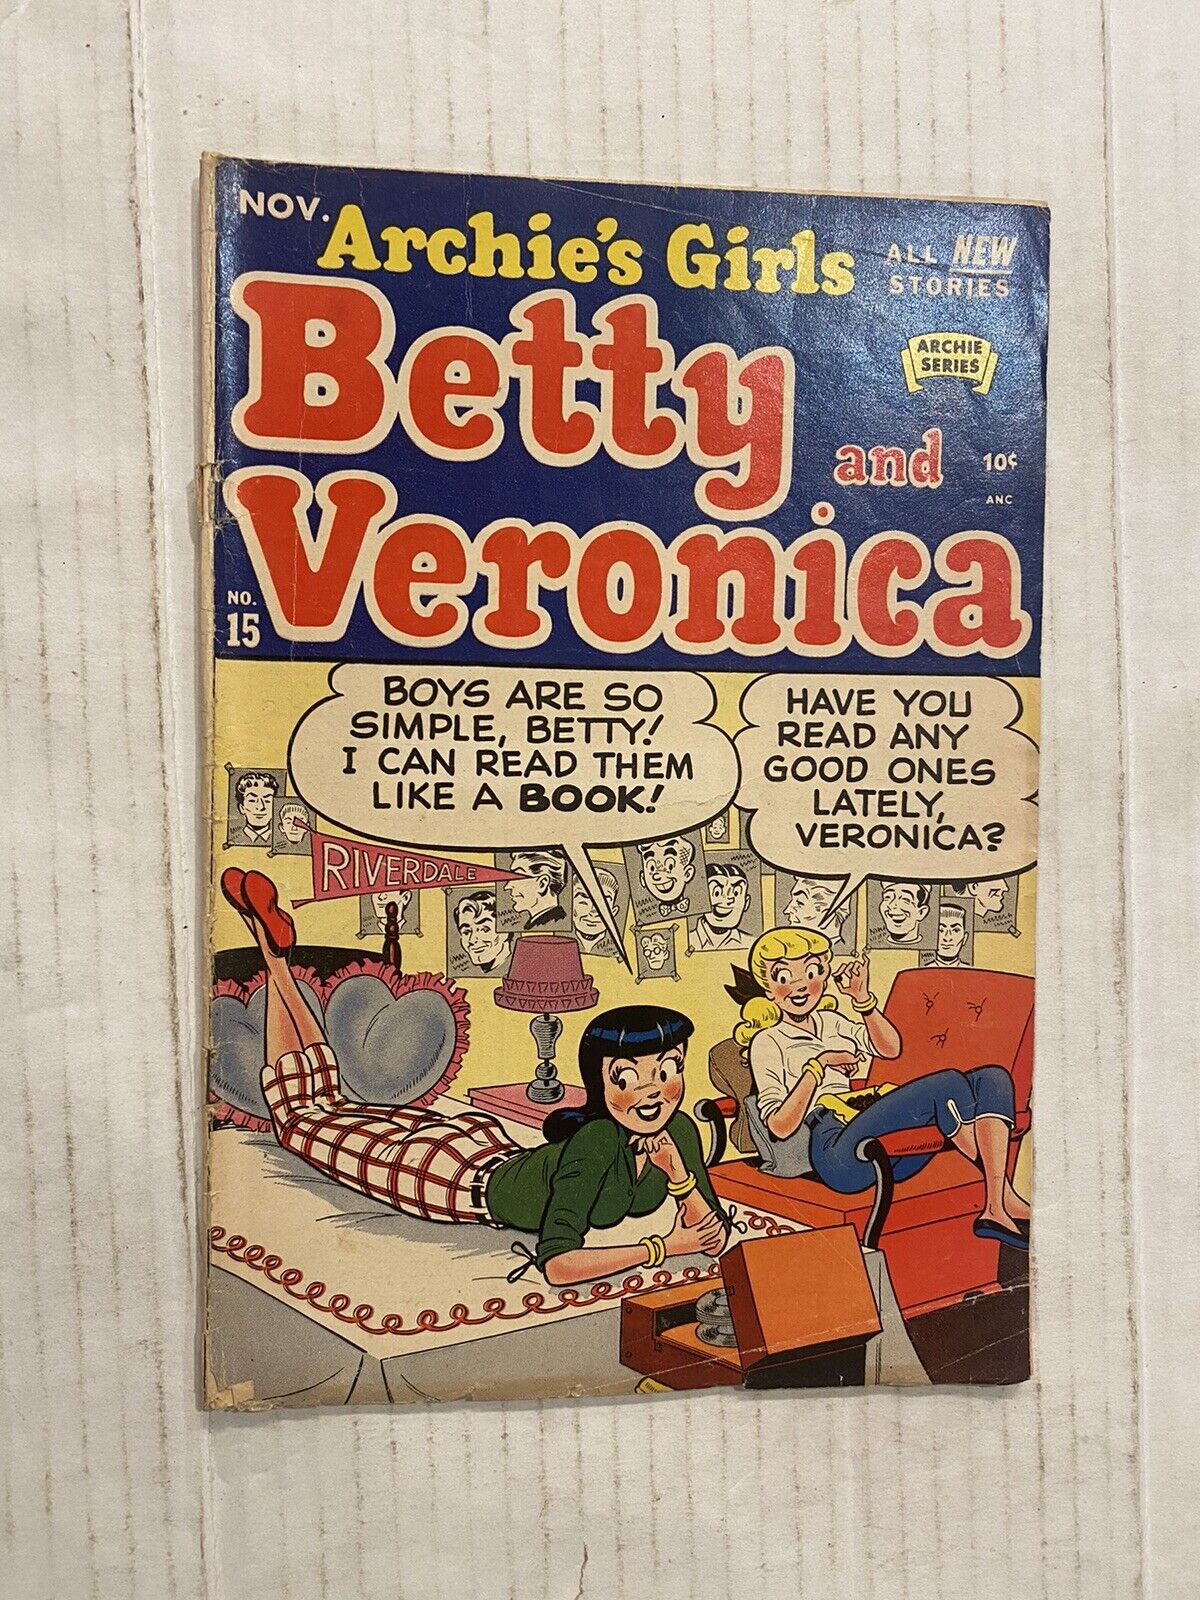 Archie's Girls BETTY AND VERONICA #15 (1954) Golden Age Comics 